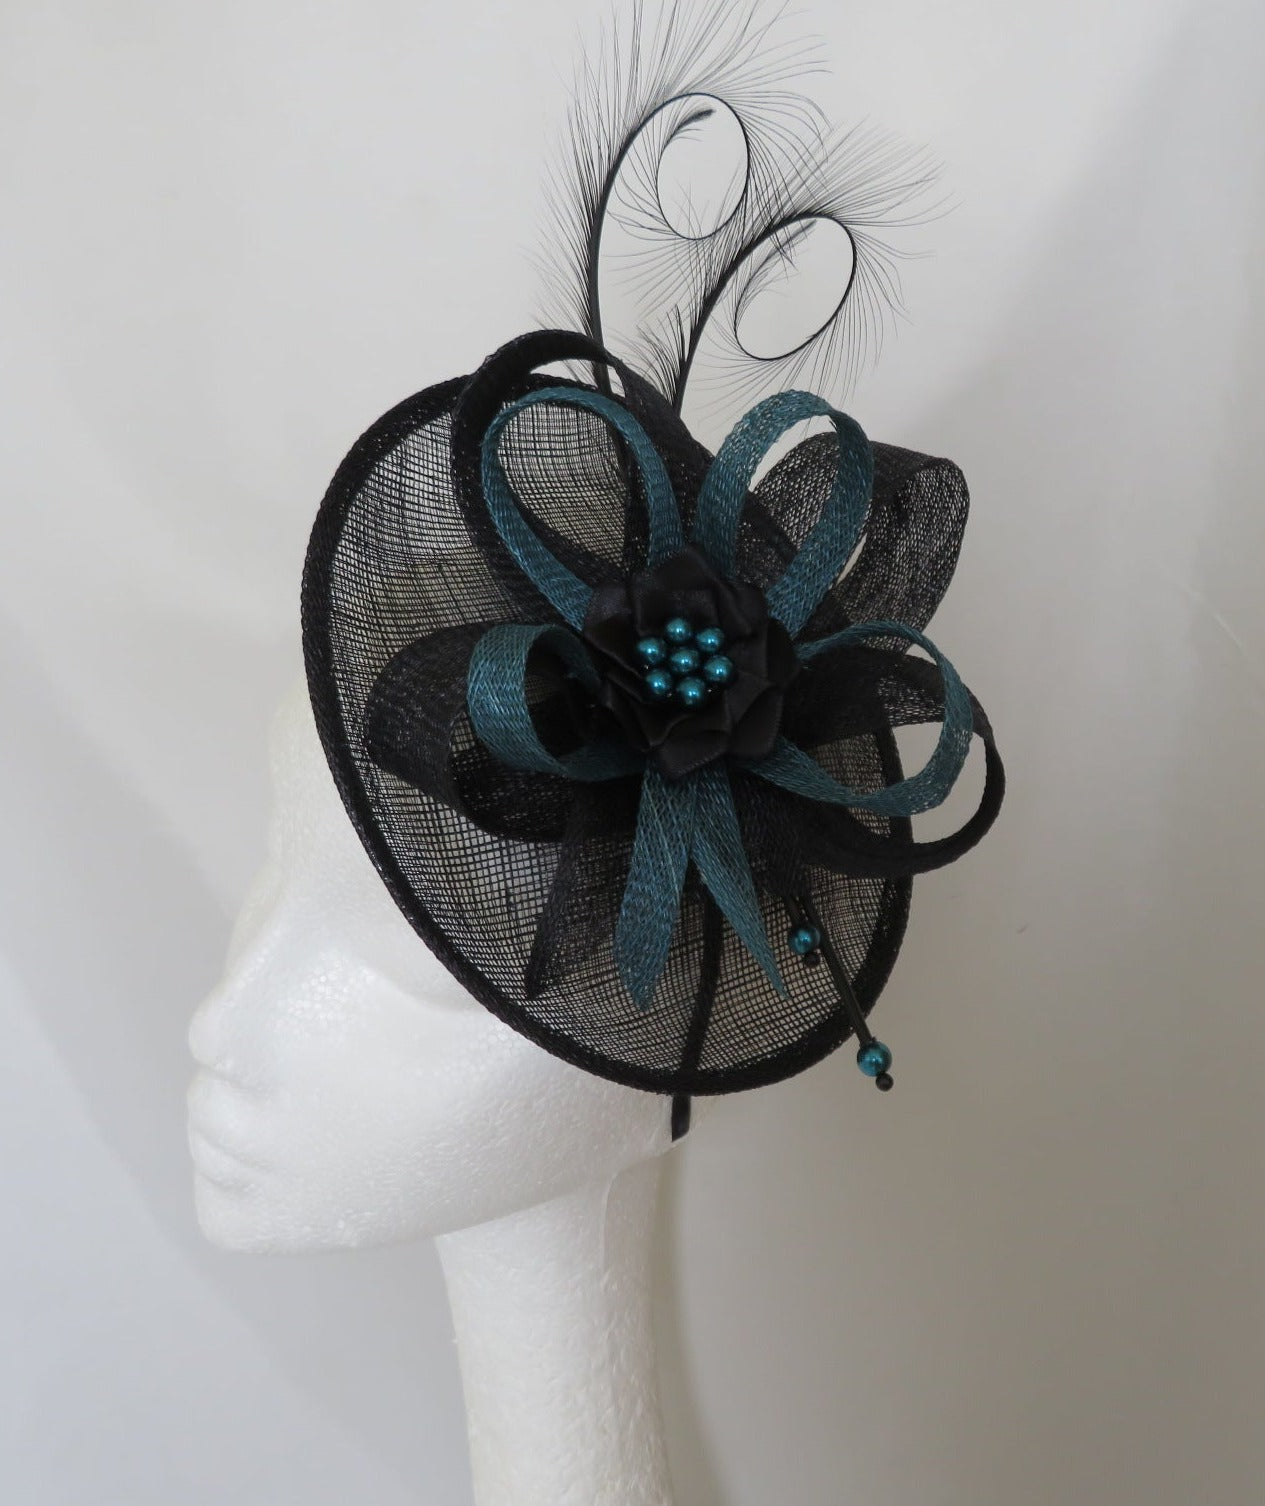 black and dark teal fascinator hat on a saucer base with an up lip black curled pheasant feathers and sinamay loops in wide and narrower in teal with a satin ribbon ruffle and teal pearls 